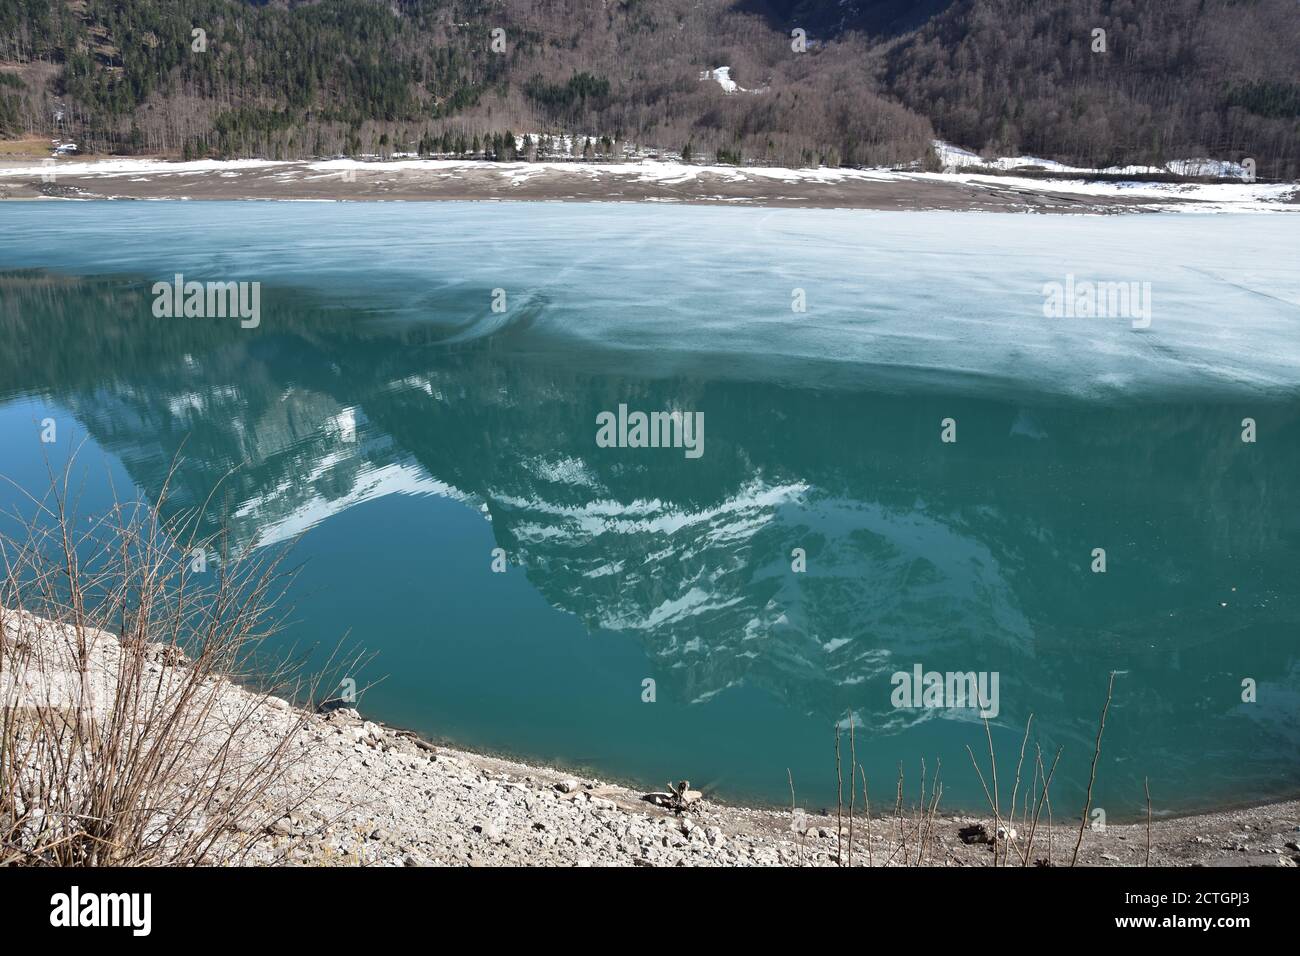 Half-empty Klontalersee lake with reflection of Alps in the water and still covered partly with ice in Klontal, Kloental valley, during sunny day. Stock Photo